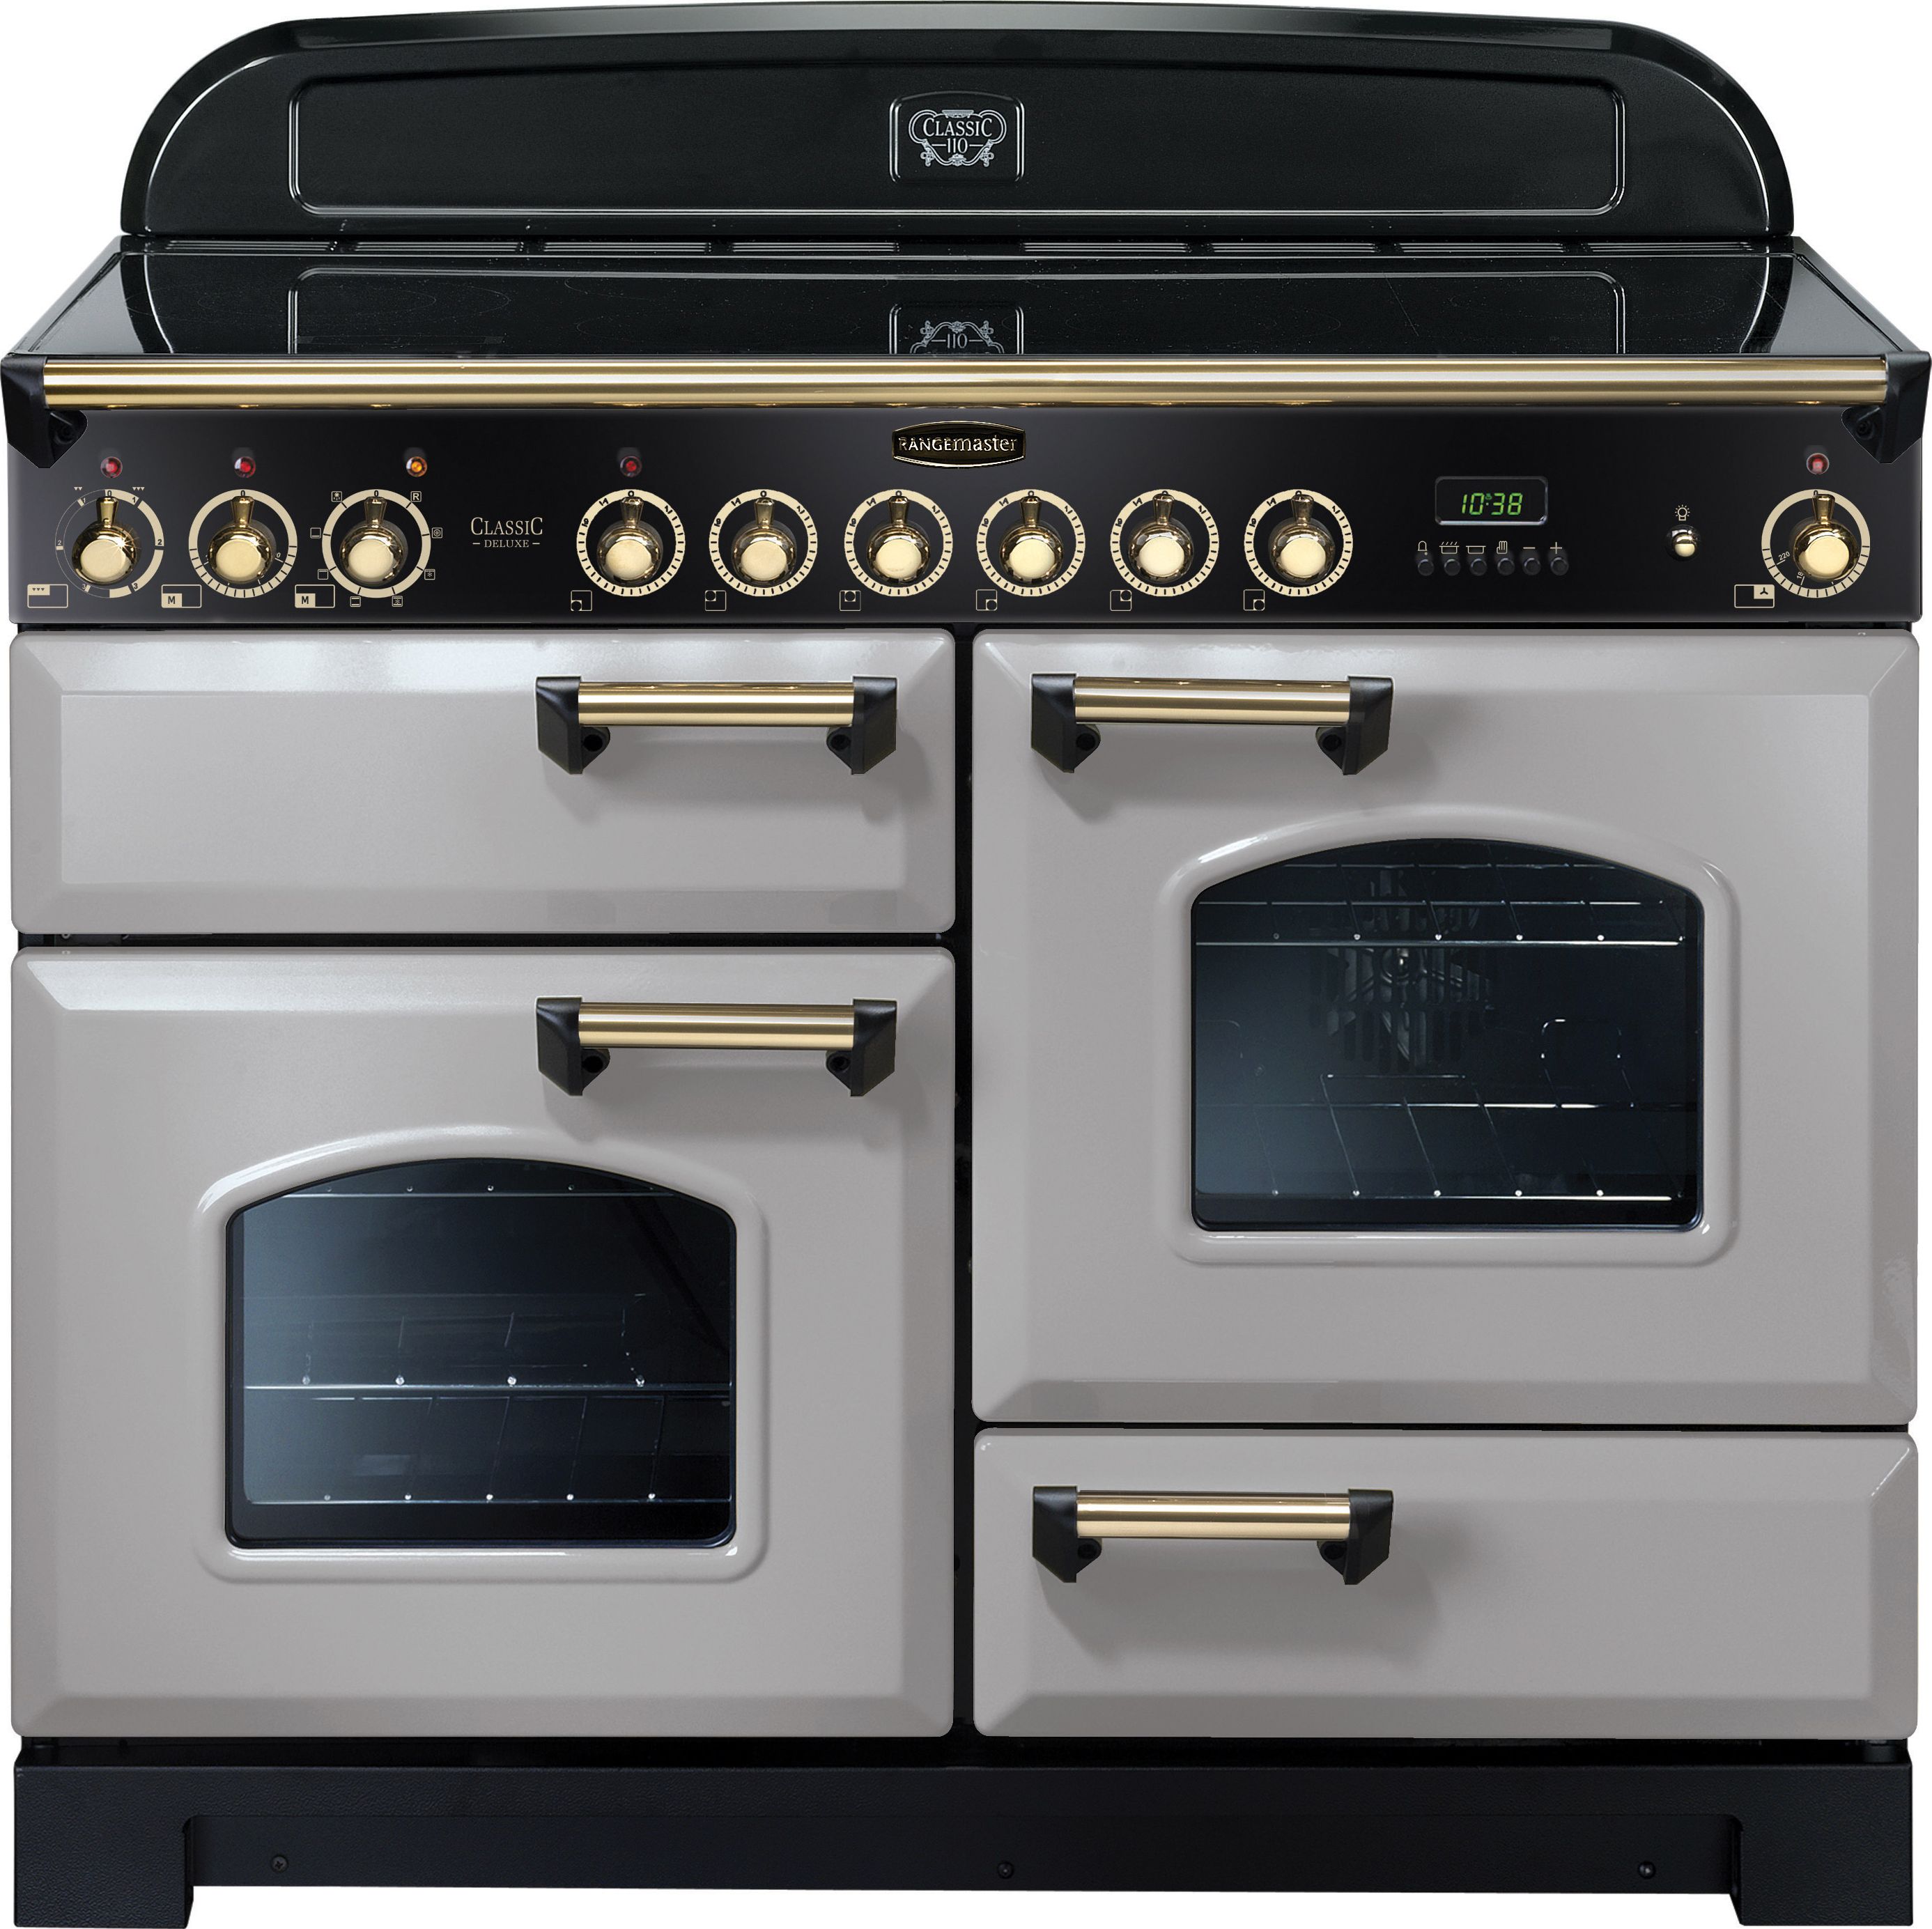 Rangemaster Classic Deluxe CDL110ECRP/B 110cm Electric Range Cooker with Ceramic Hob - Royal Pearl / Brass - A/A Rated, Grey